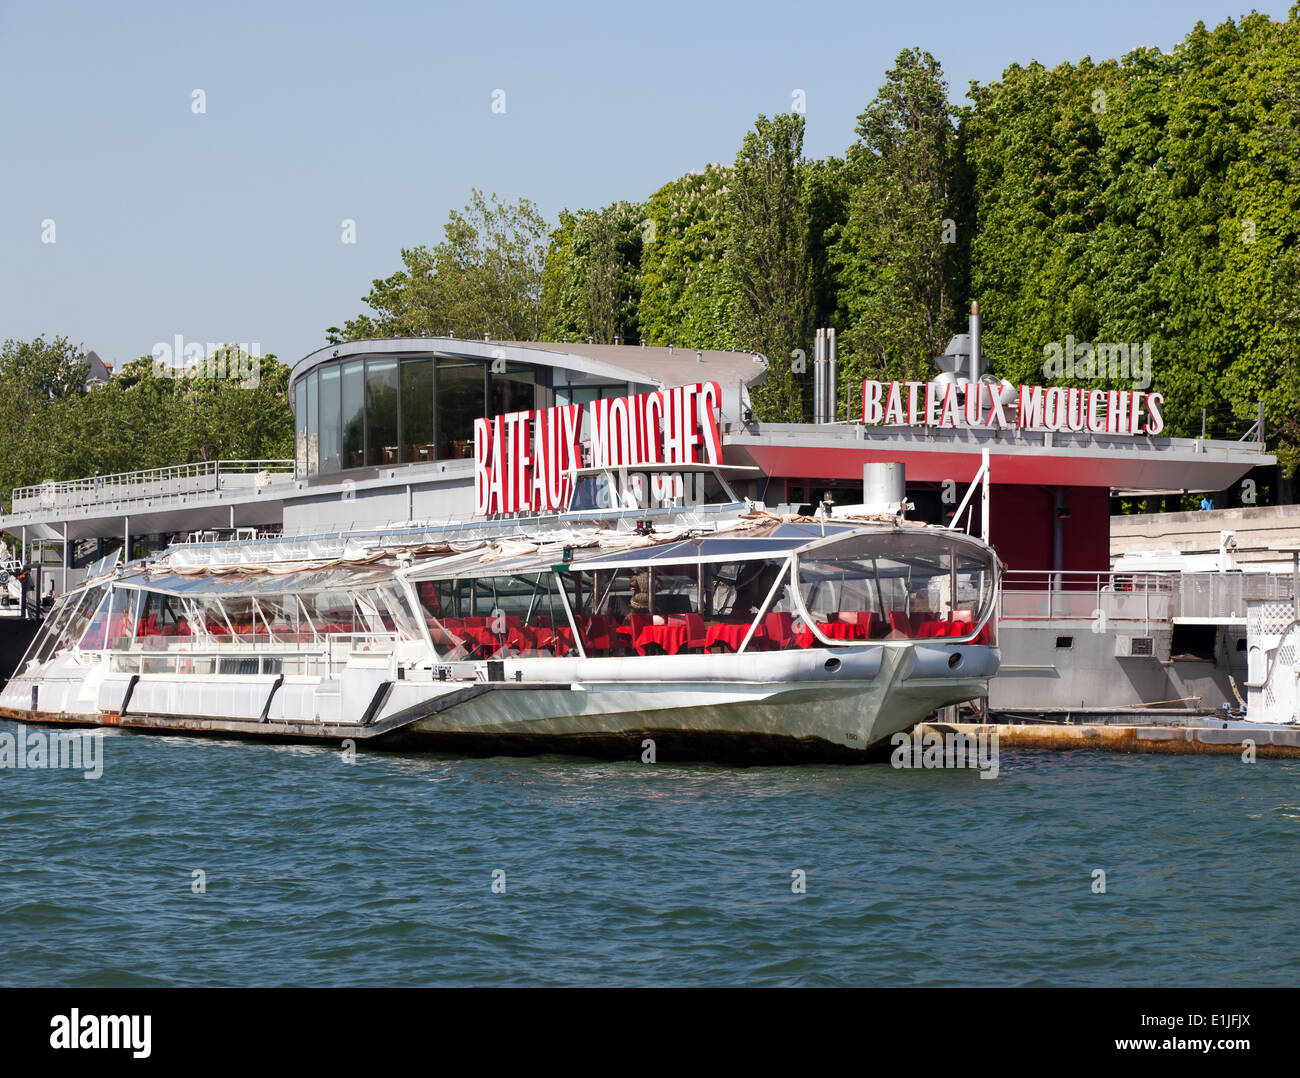 A  Bateaux Mouches, moored alongside its headquarters on the River Seine, Paris, France. Stock Photo